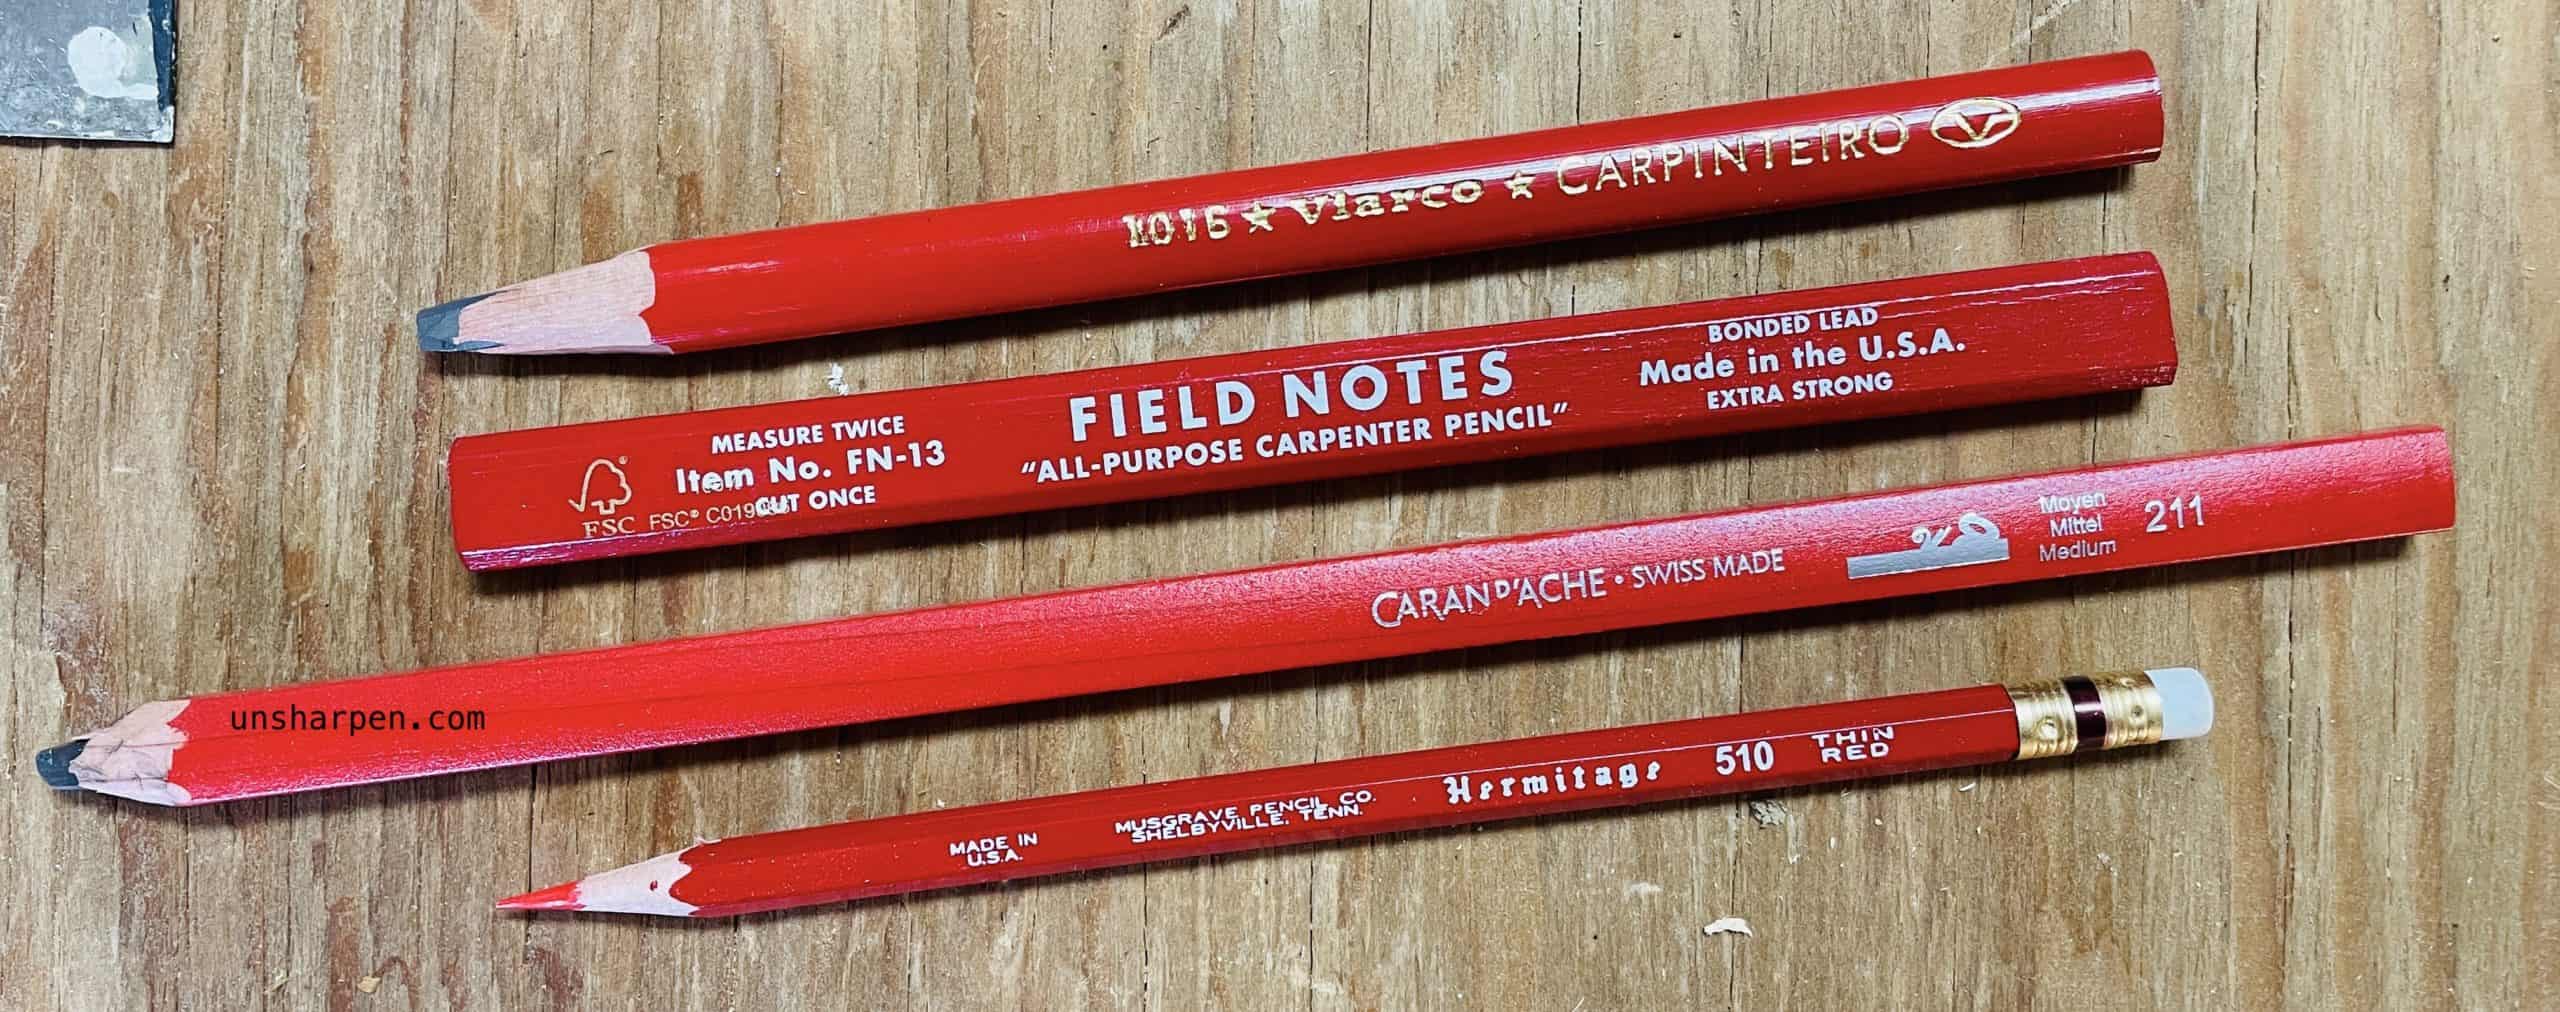 What Is A Carpenter's Pencil?